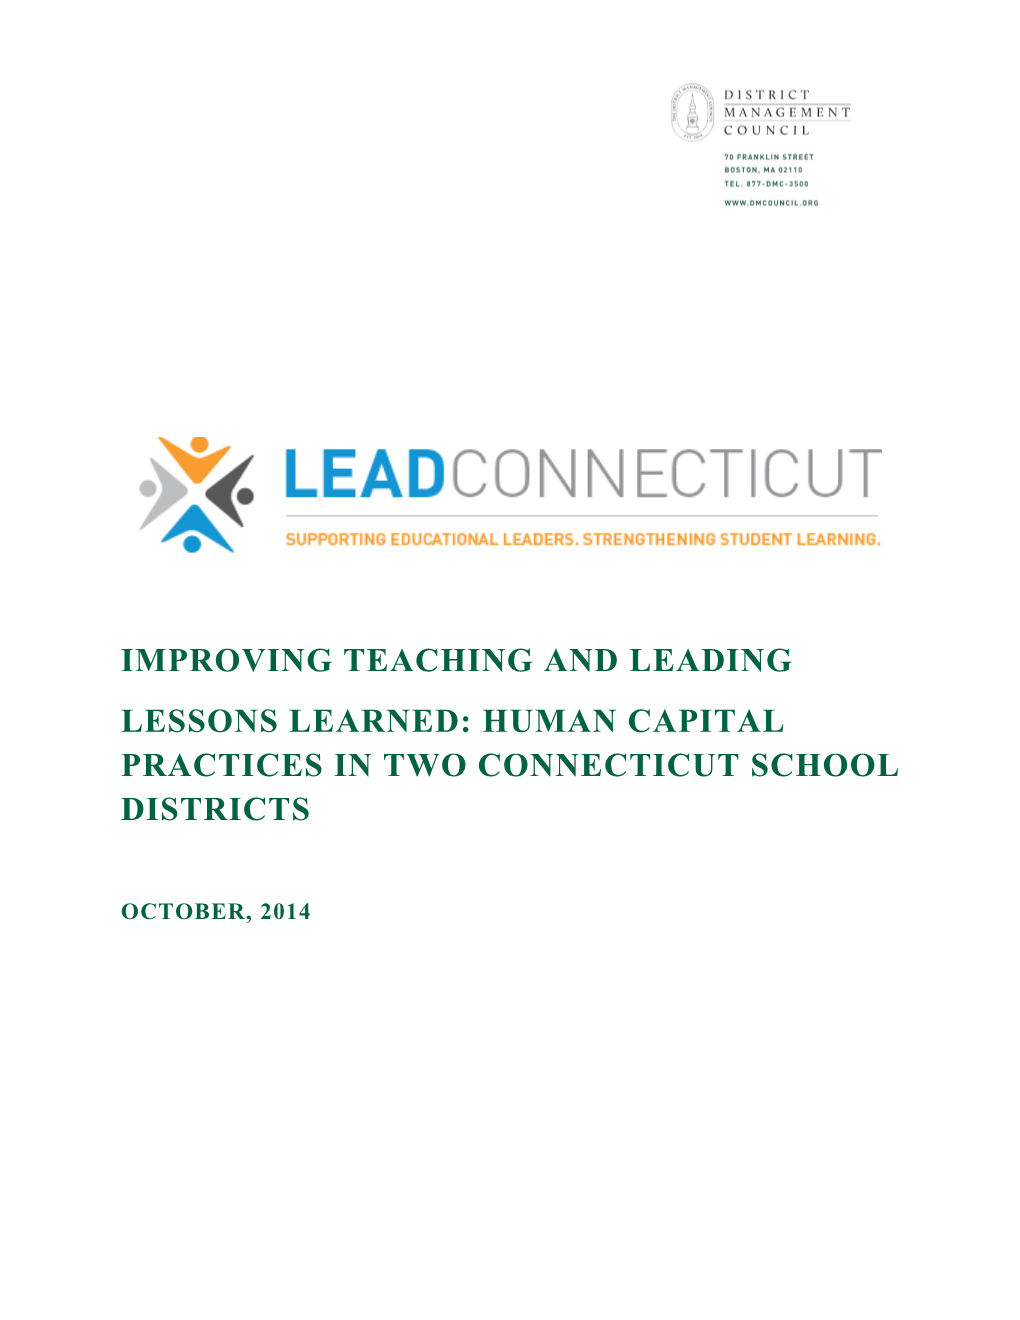 Improving Teaching and Leading